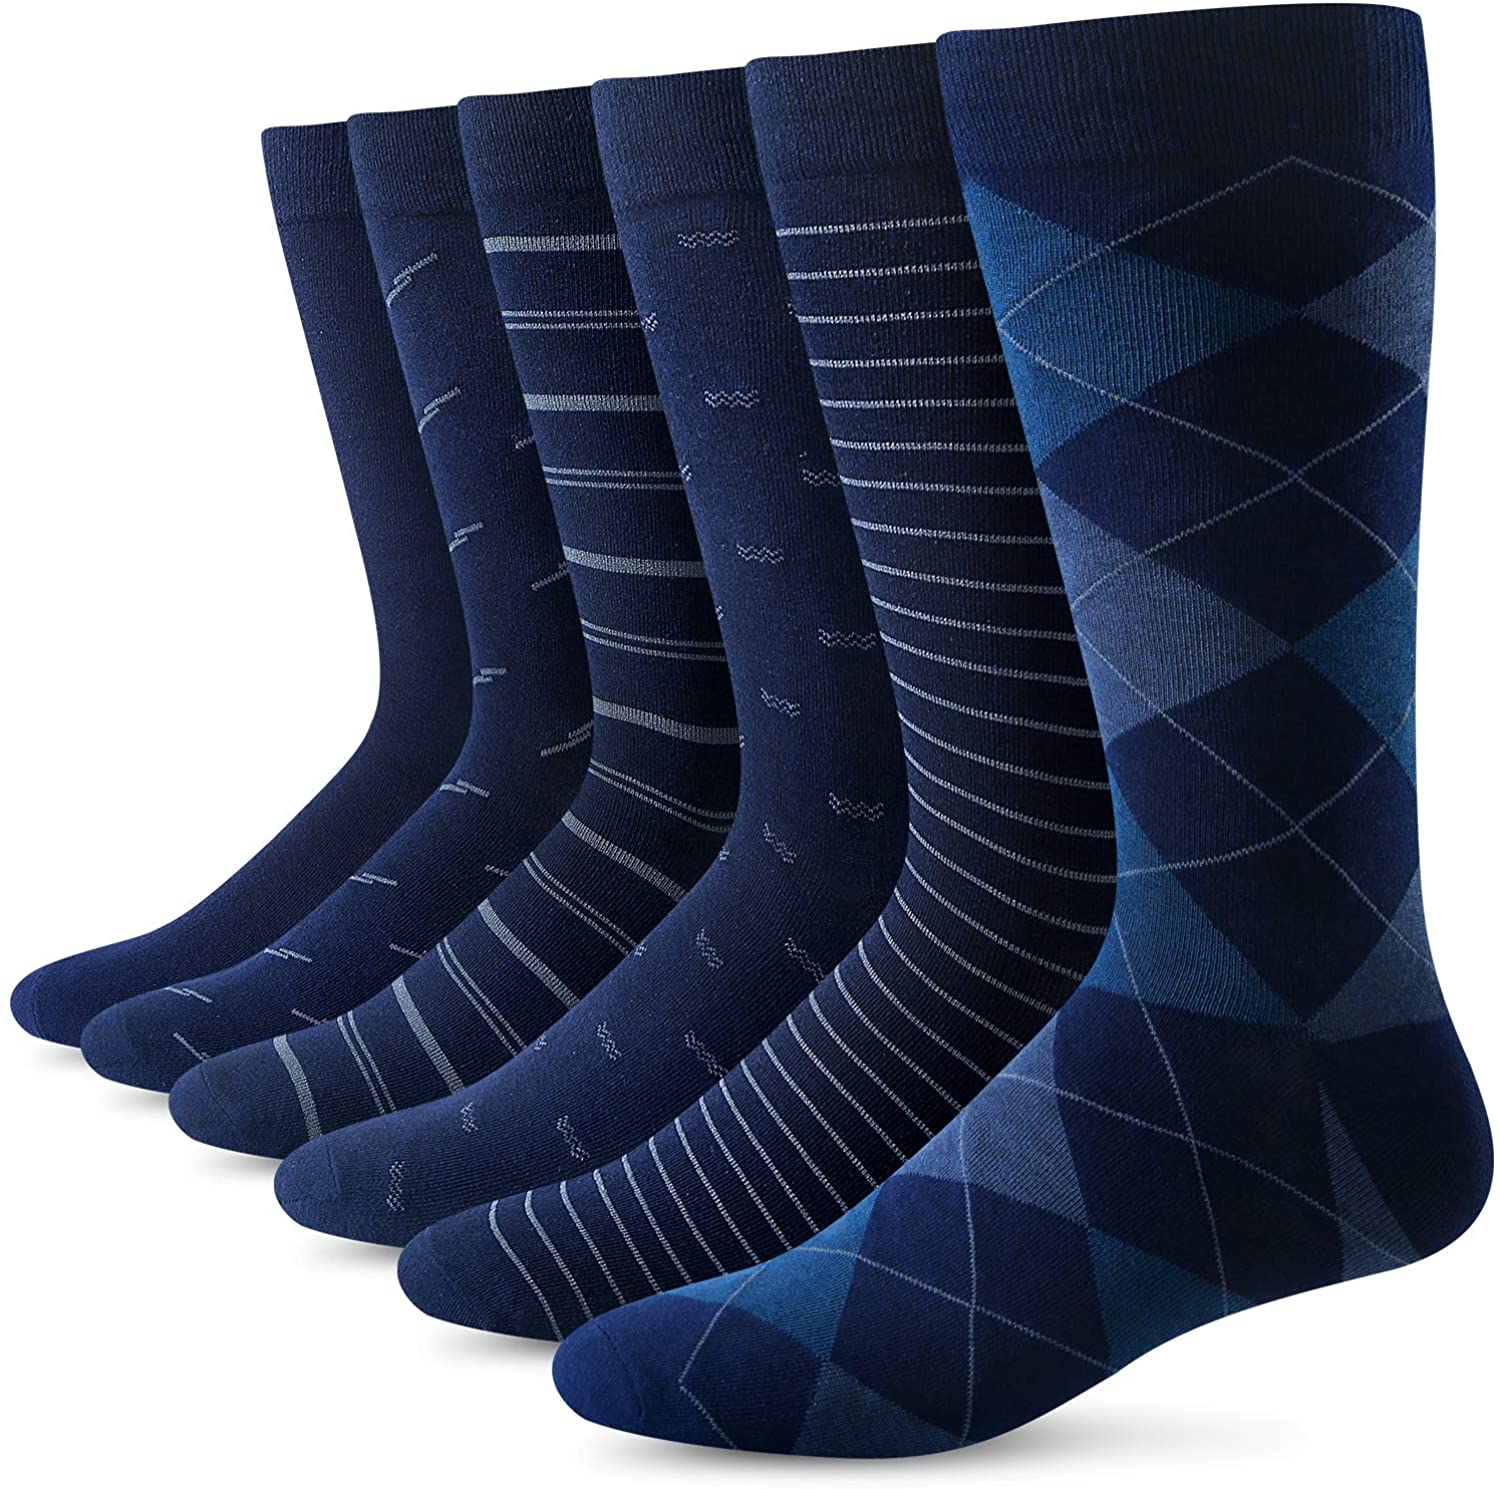 Yousu Mens Dress Socks Business Casual Solid Pattern Cotton Crew